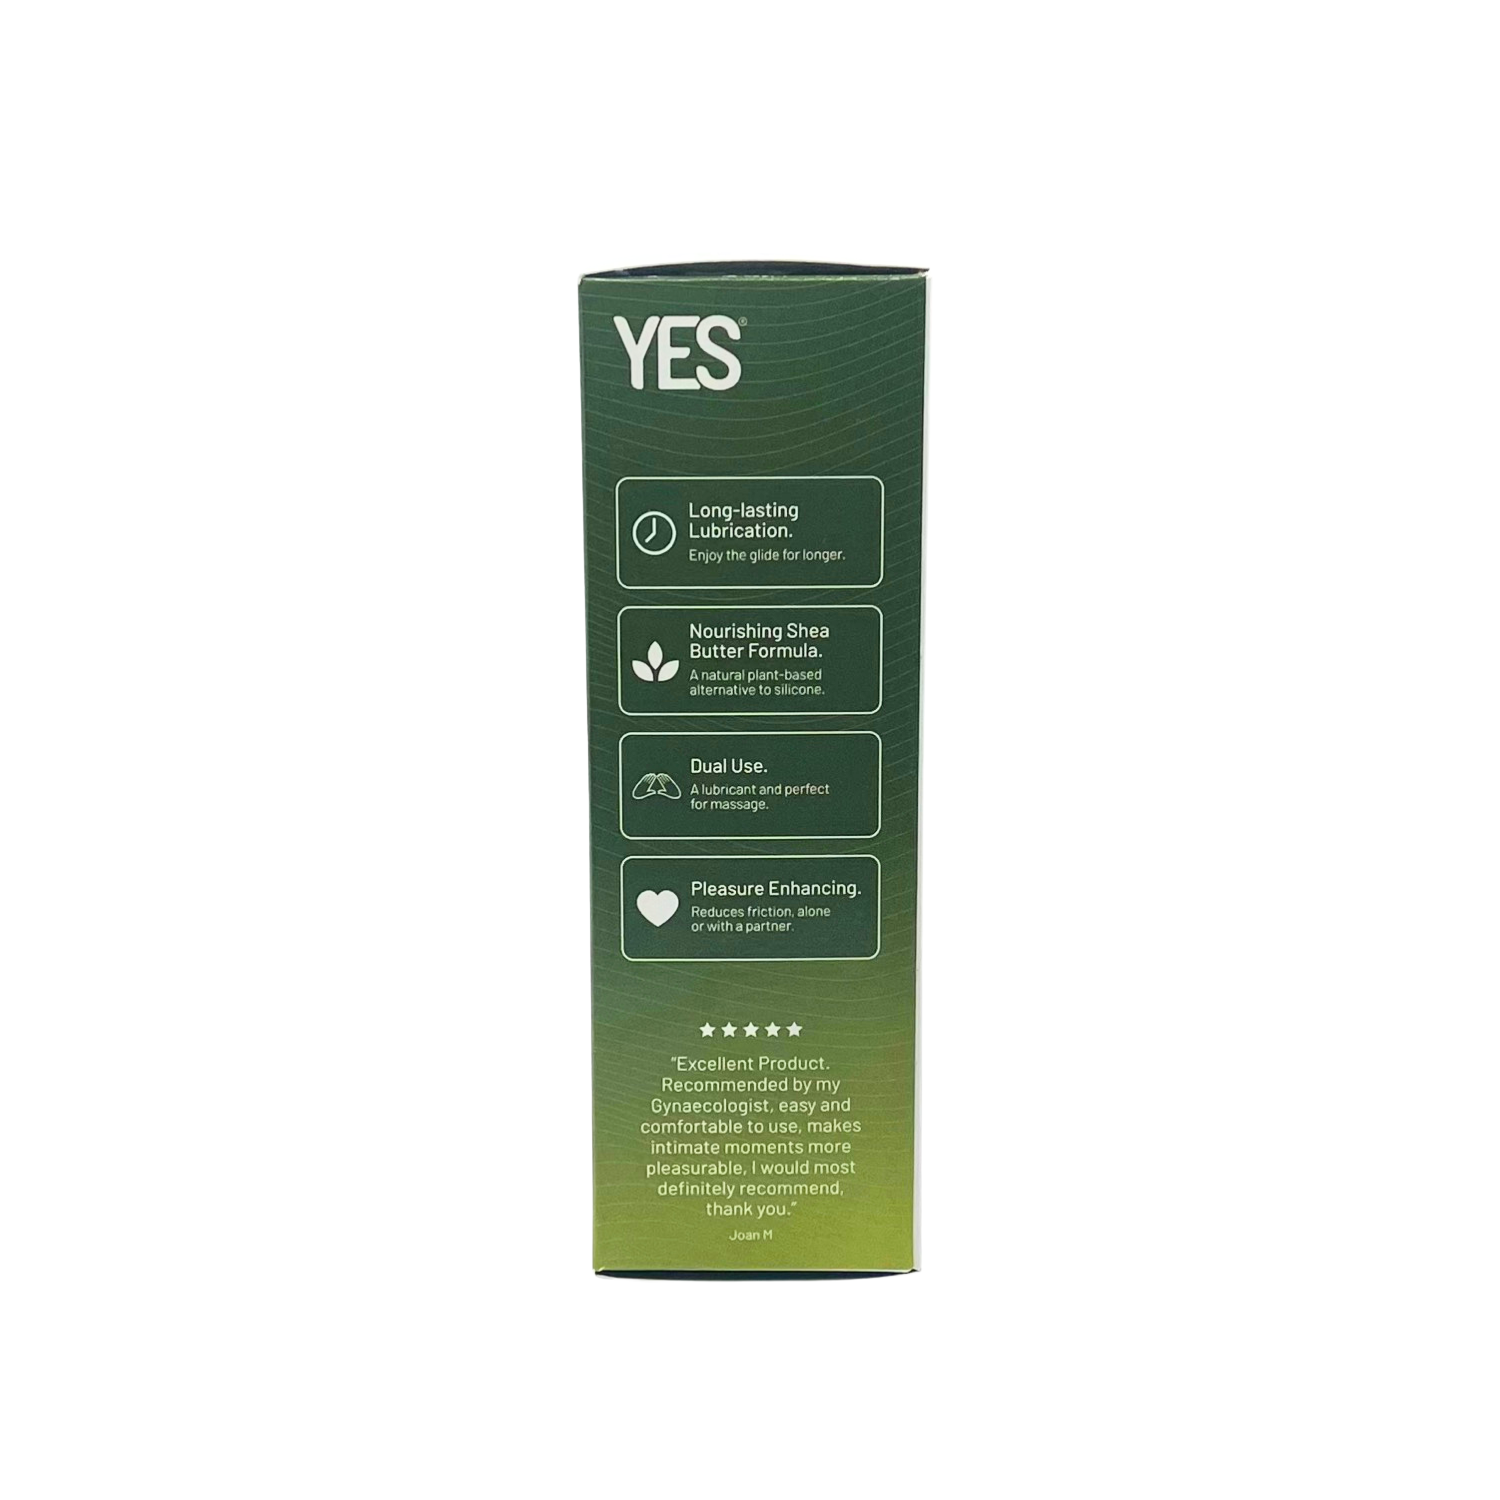 YES PLANT-OIL BASED PERSONAL LUBRICANT